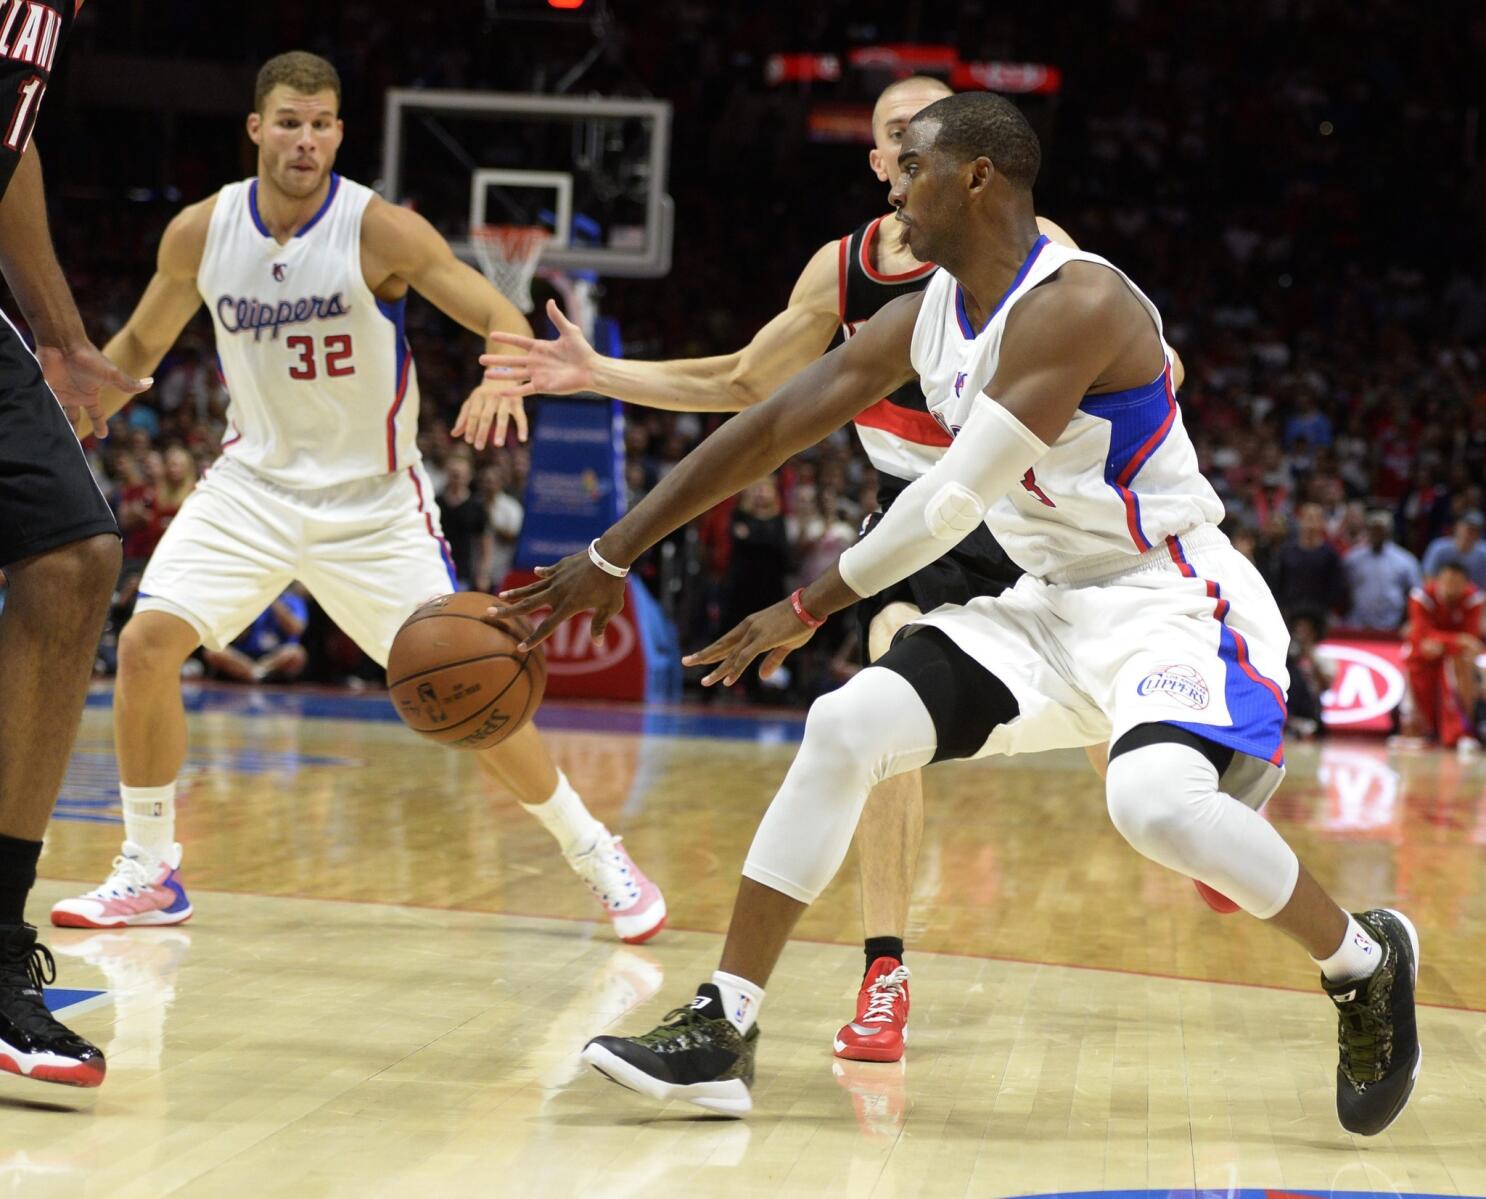 LA Clippers Fall to Portland, But the Future Is Bright with Blake